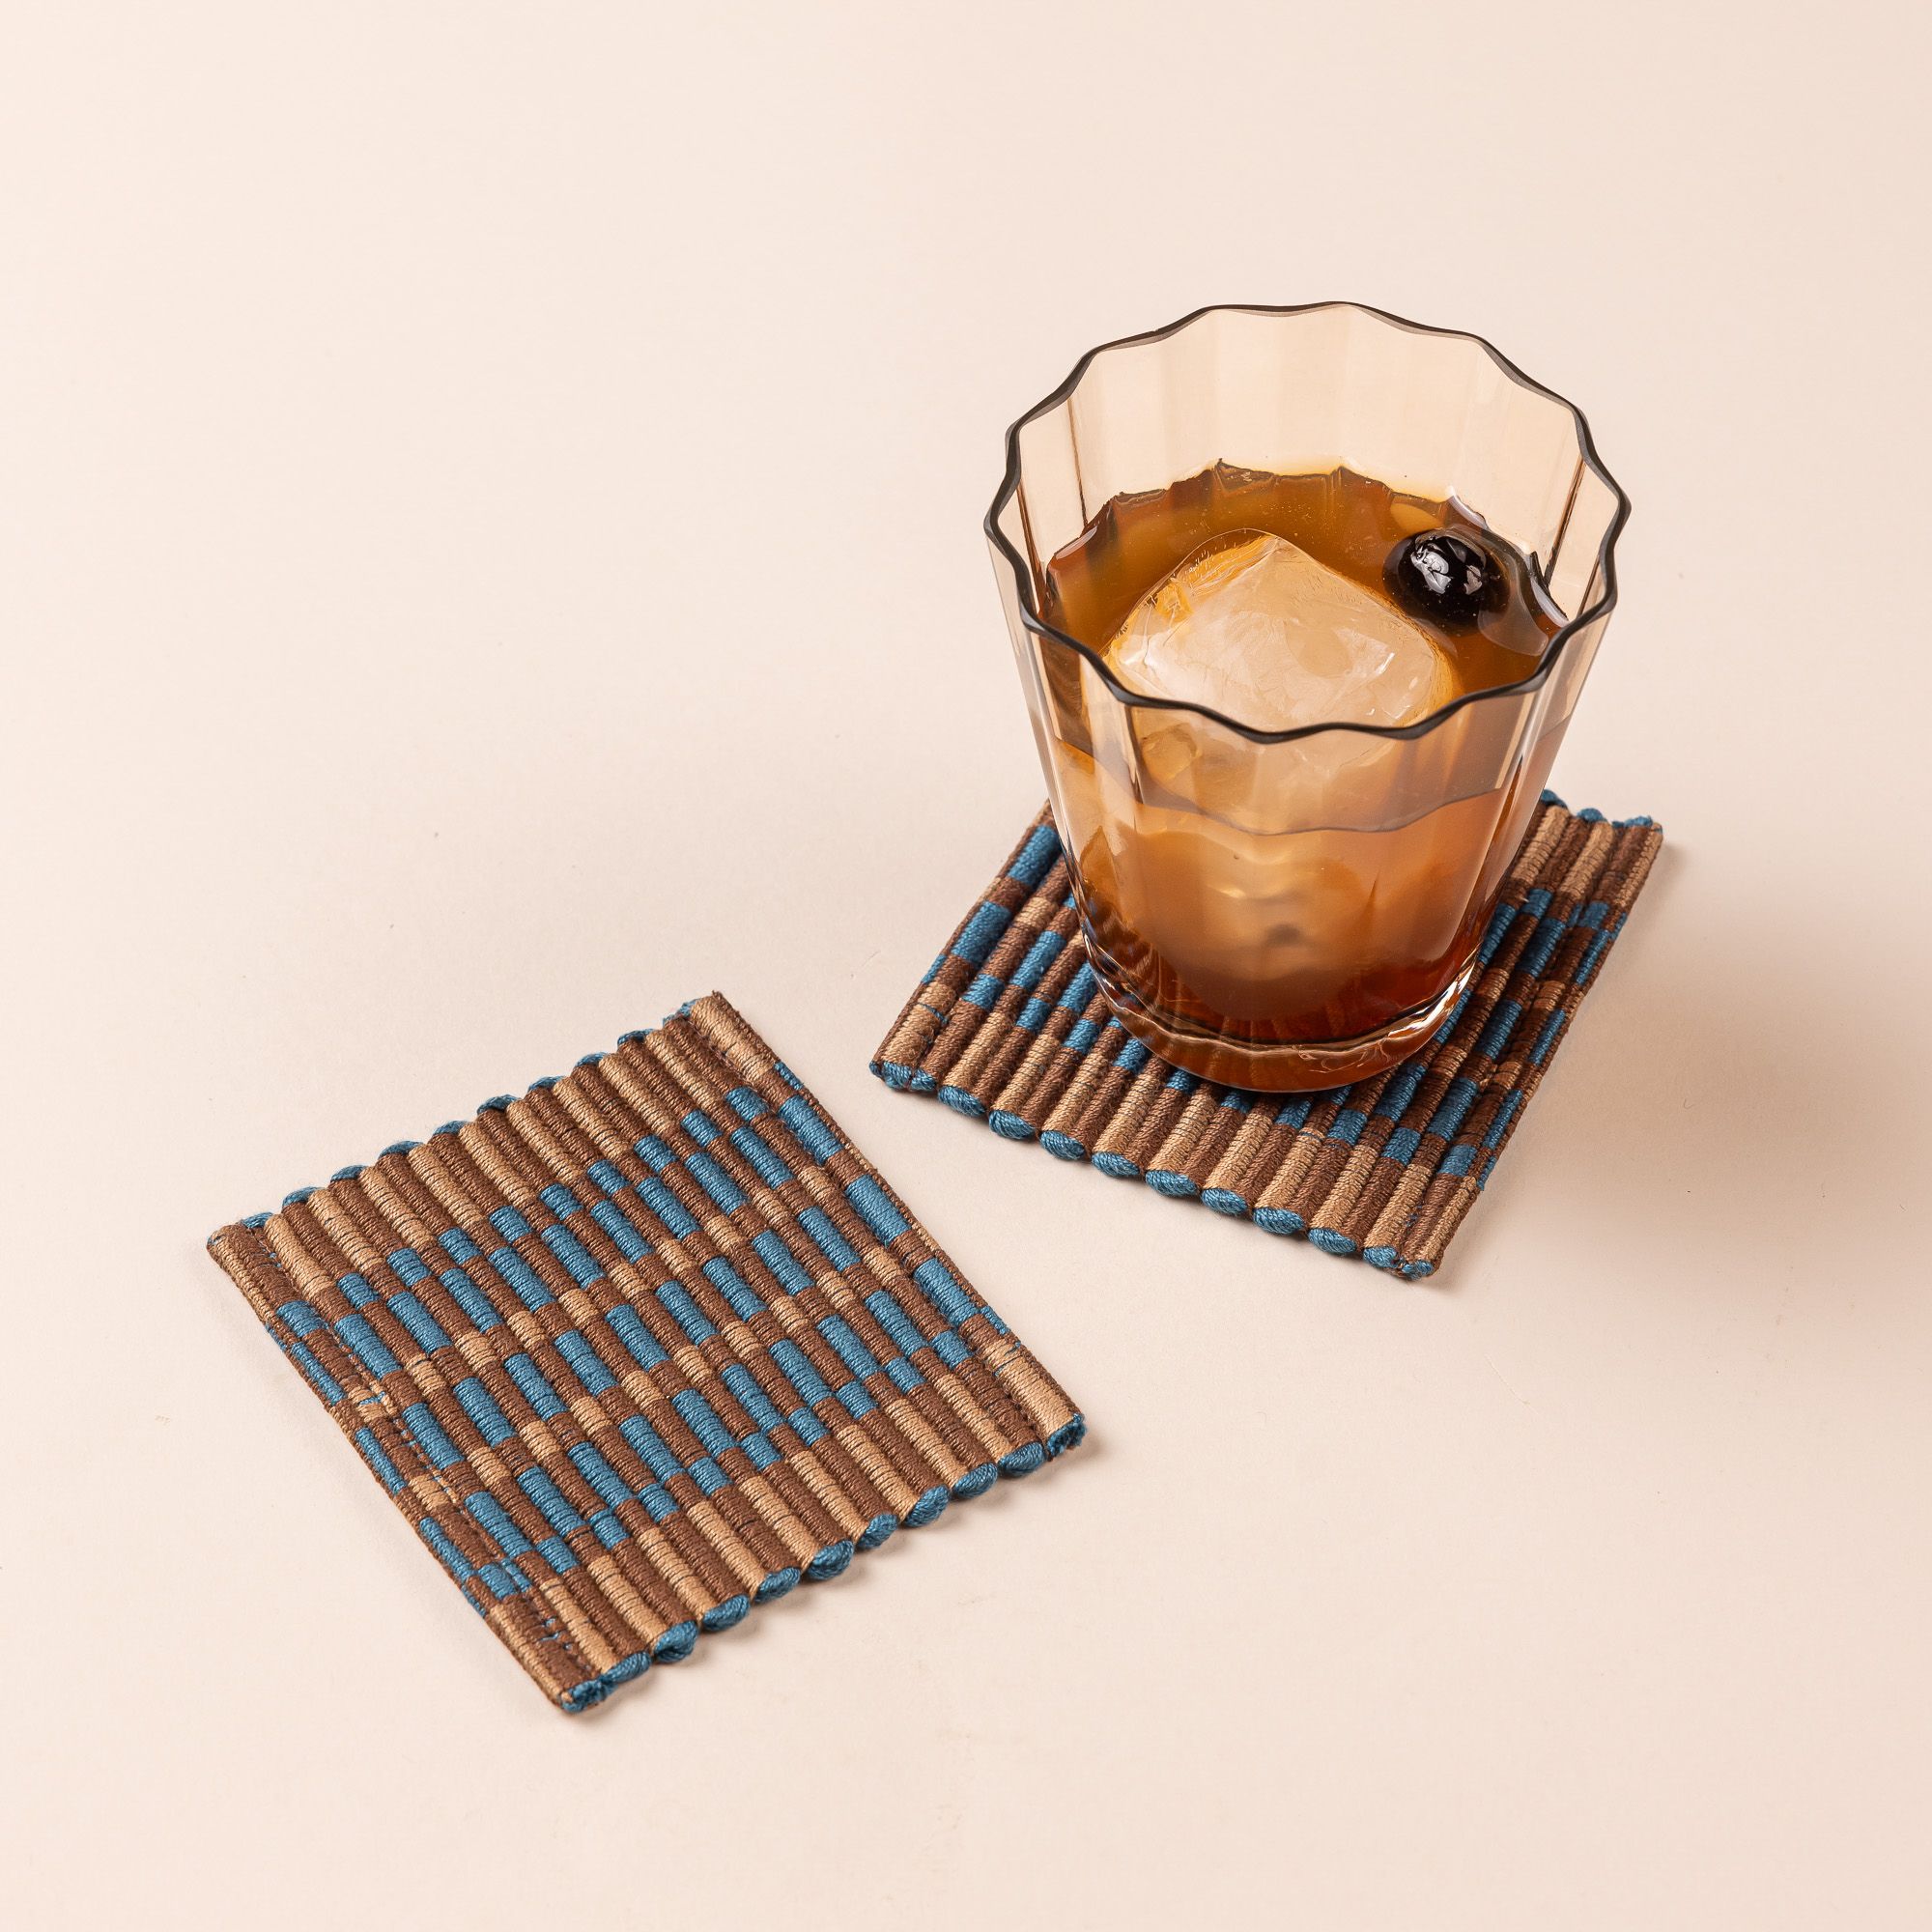 Two square coasters that are hand woven in a striped rectangular grid design in brown, tan, and blue colors. An elegant light tan lowball glass with a cocktail in it sits on the right coaster.